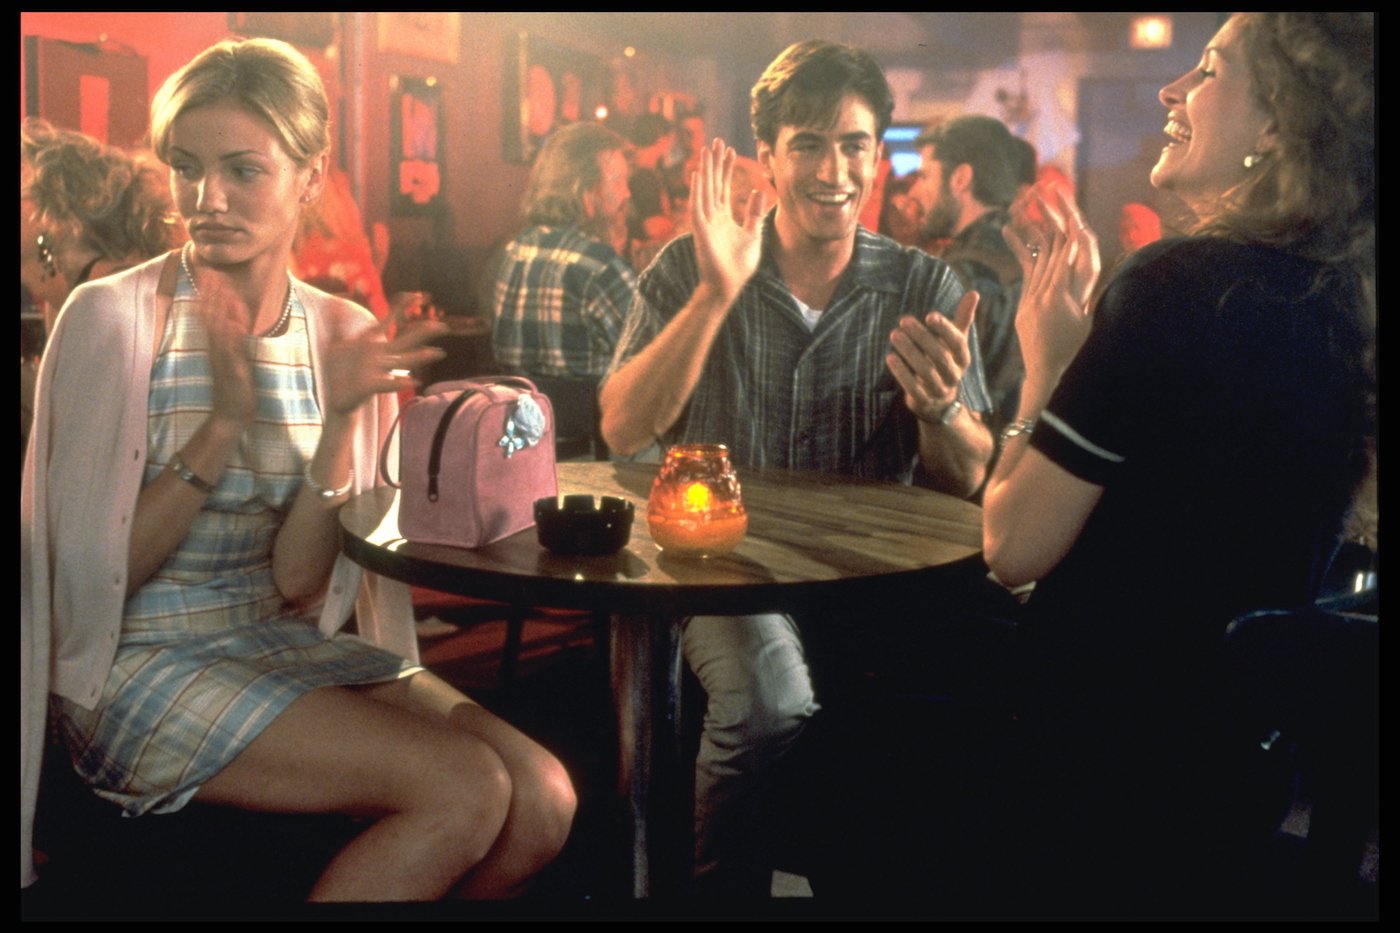 Cameron Diaz, Dermot Mulroney, and Julia Roberts sit at a table in a scene from 'My Best Friend's Wedding'